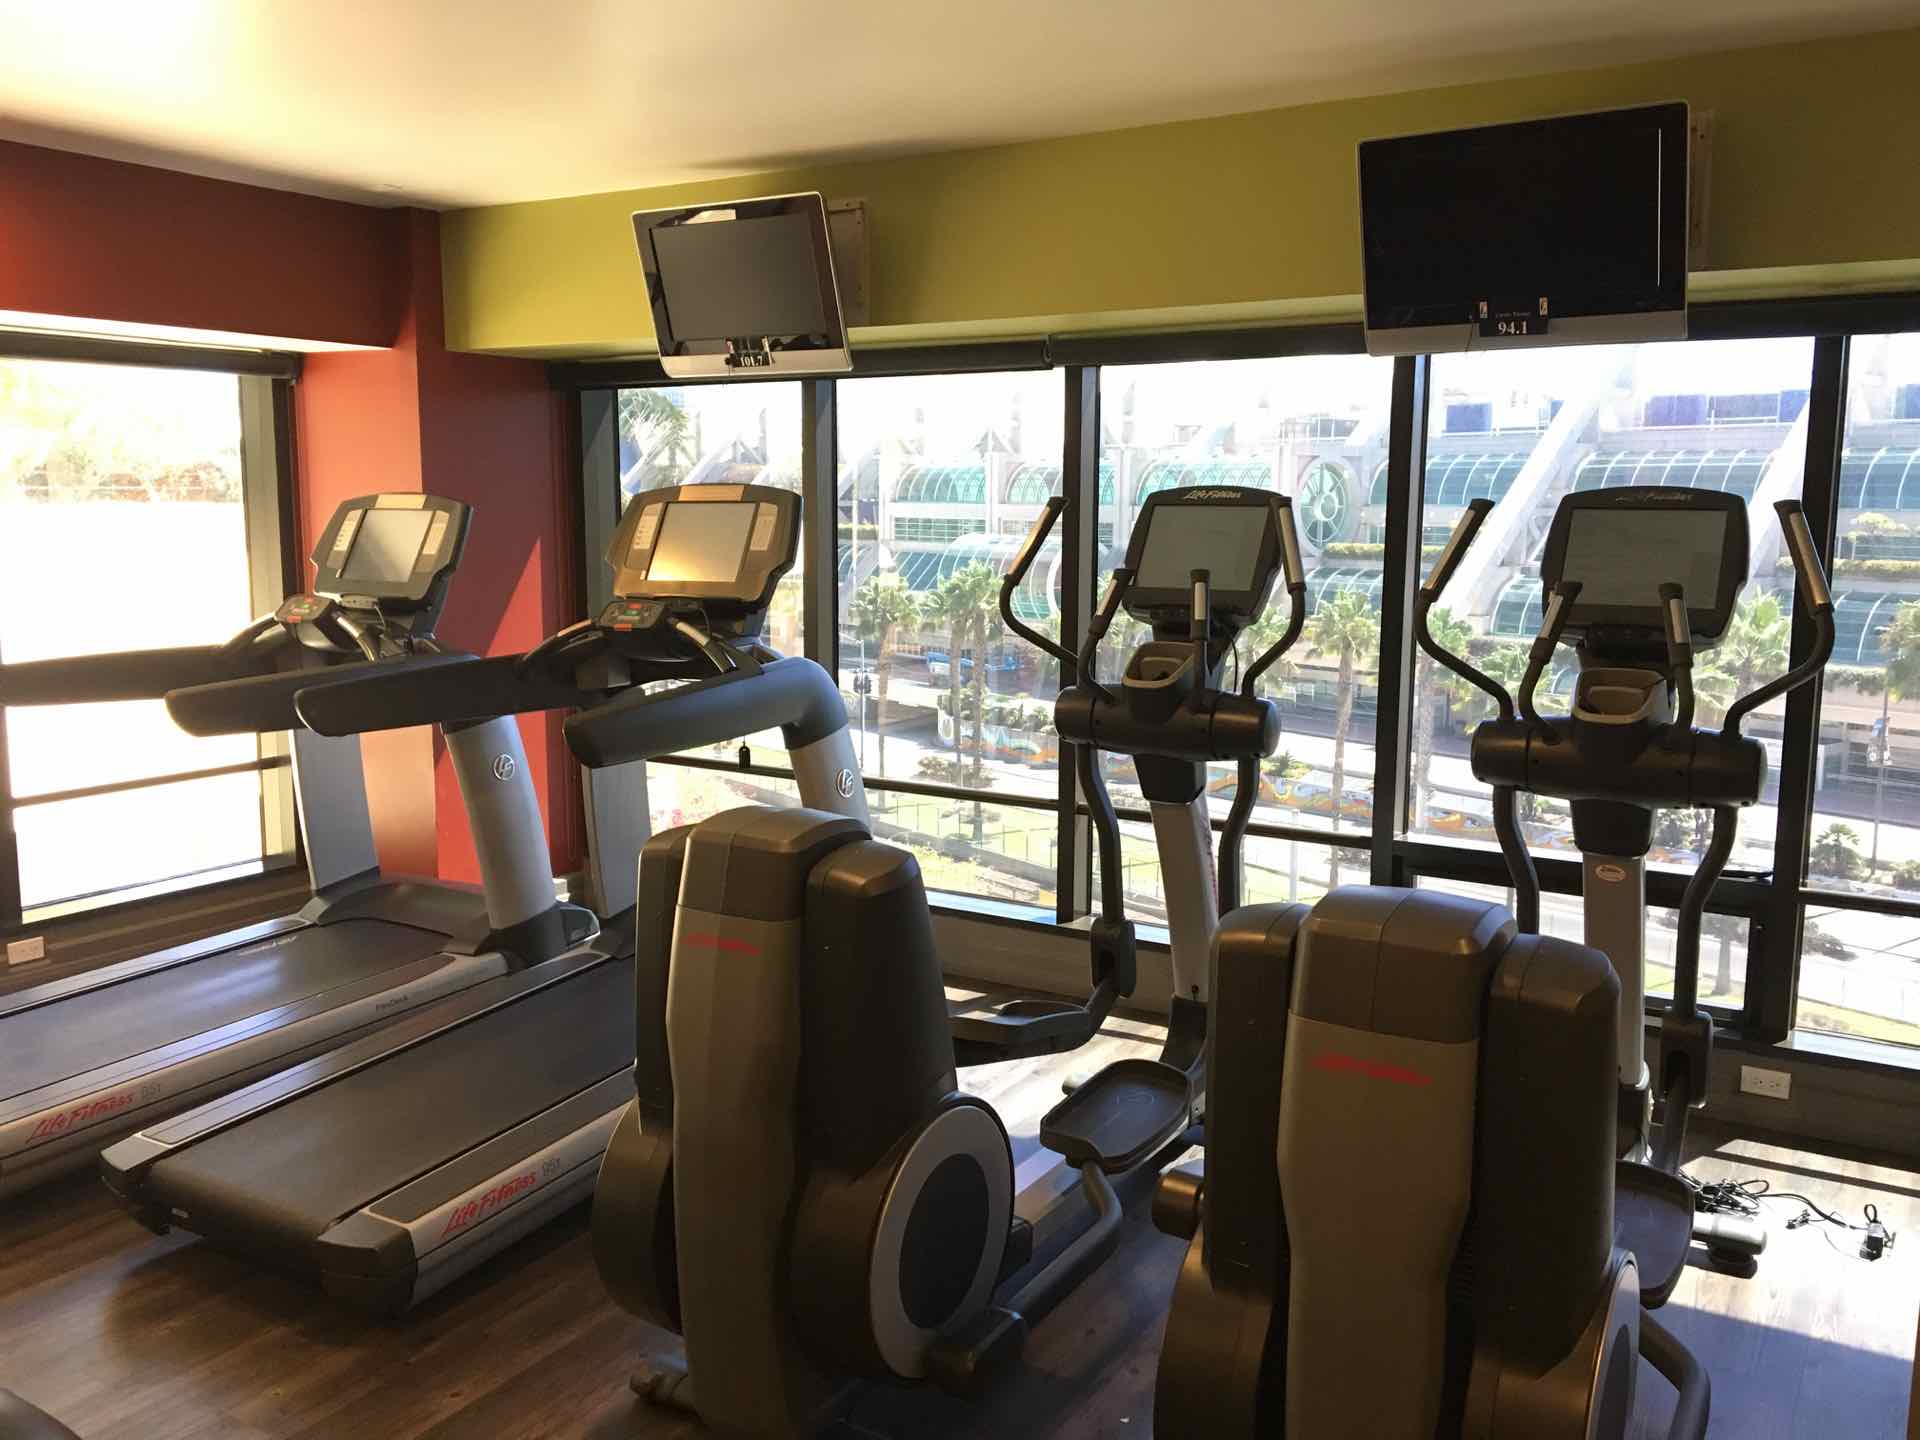 cardio equipment in the gym at Harbor Club